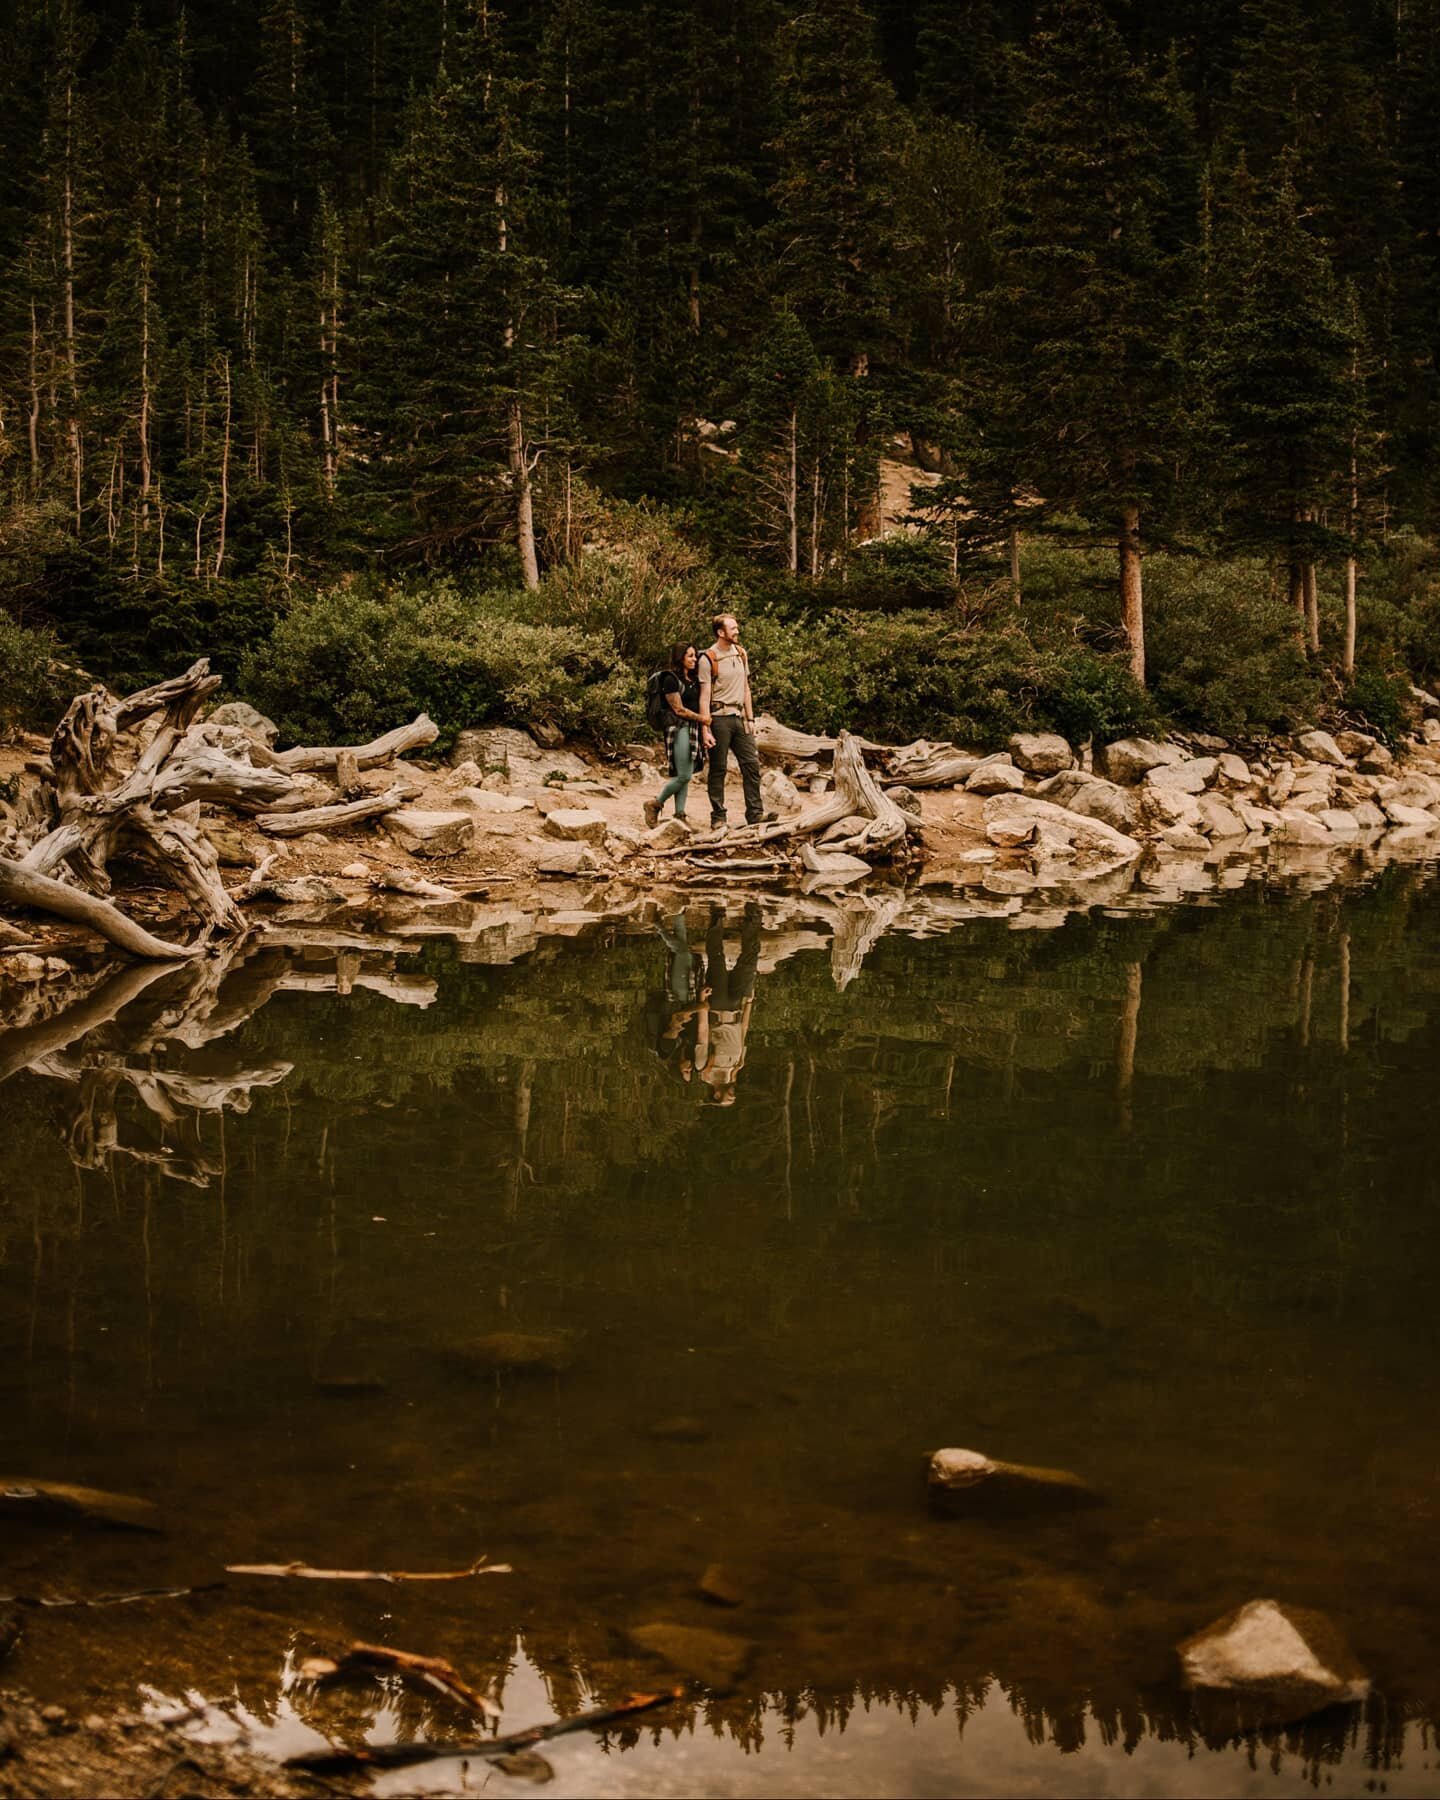 Oh darling, let's be adventurers.
.
I loved doing a photo meetup/hike with Whit and her dude! 
P.S. Peep my stories cause the Instagram crop struggle is real.
.
.